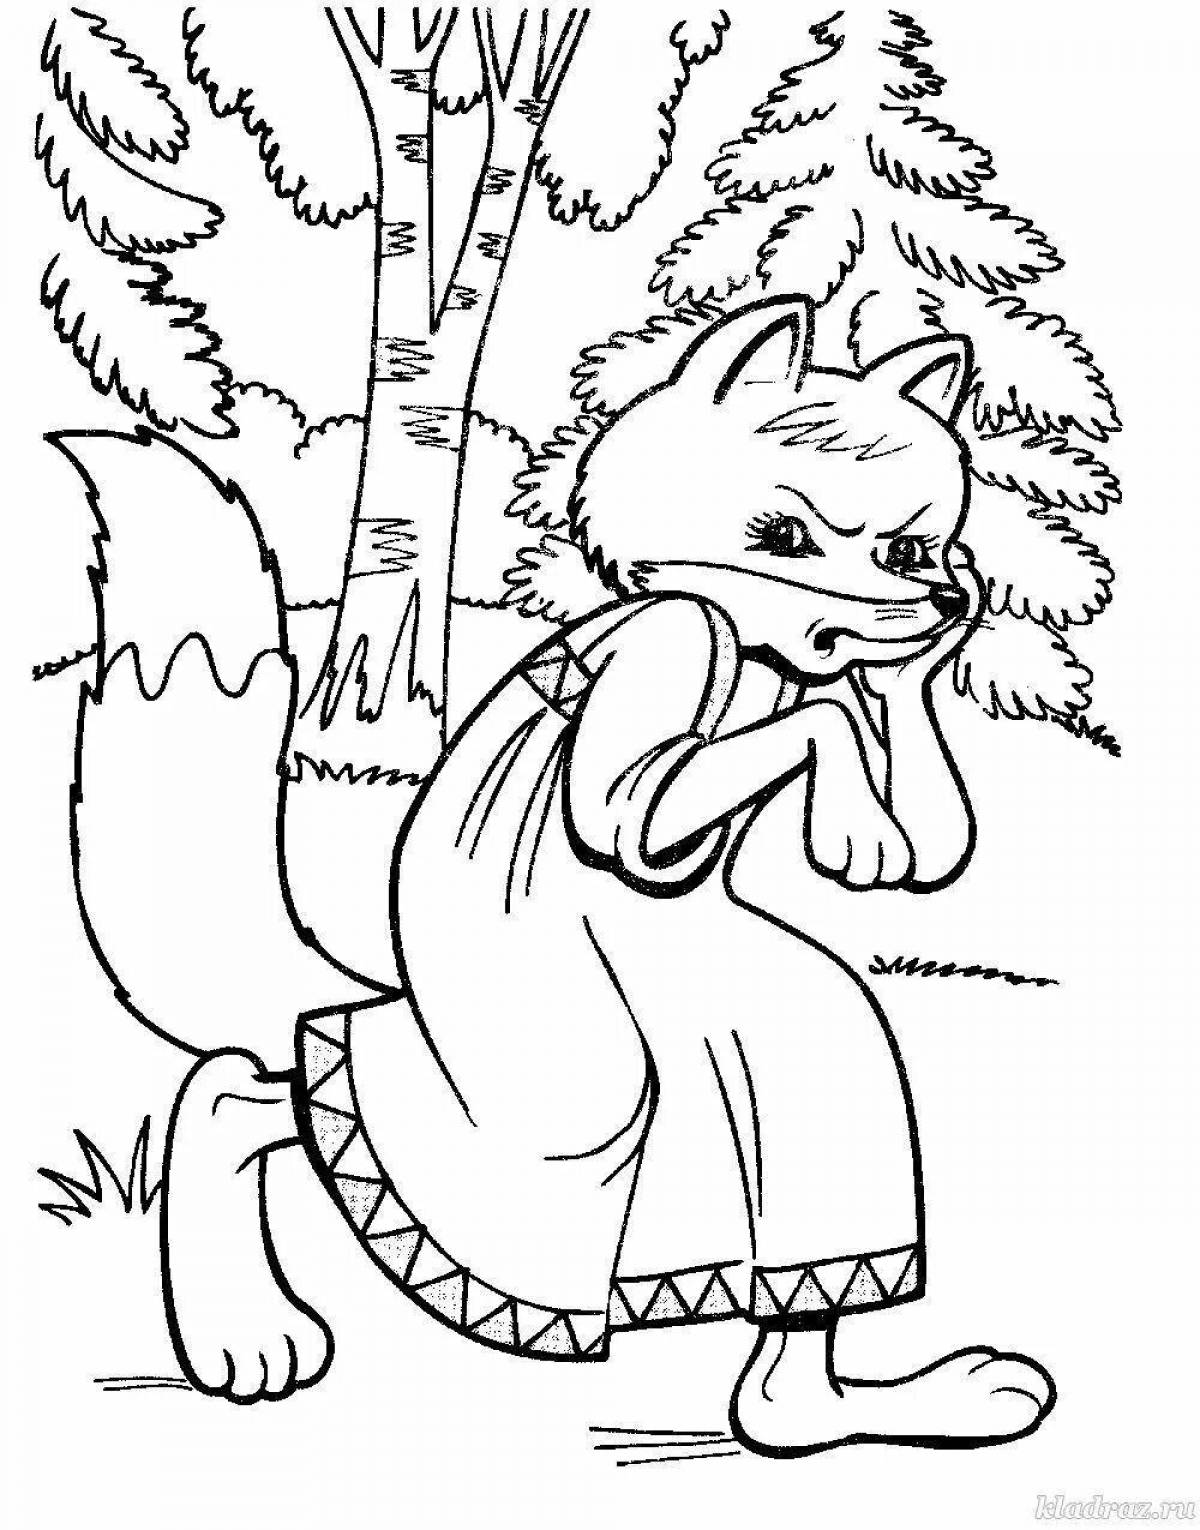 Coloring page funny cat and rooster